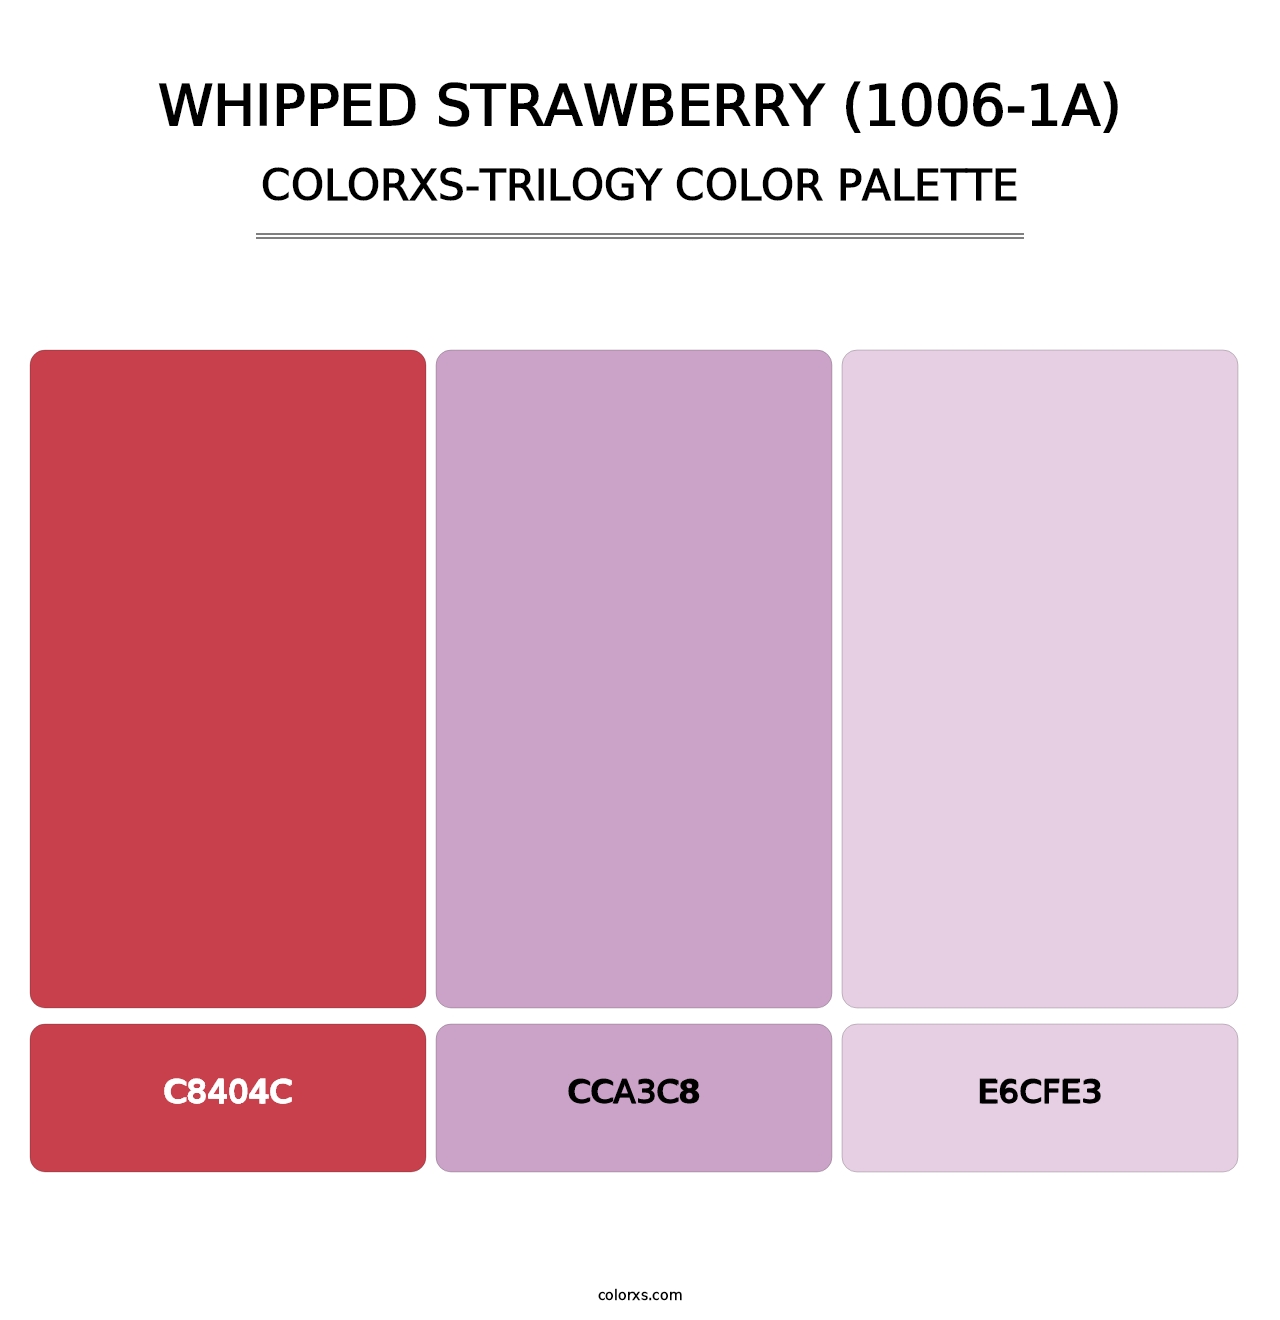 Whipped Strawberry (1006-1A) - Colorxs Trilogy Palette